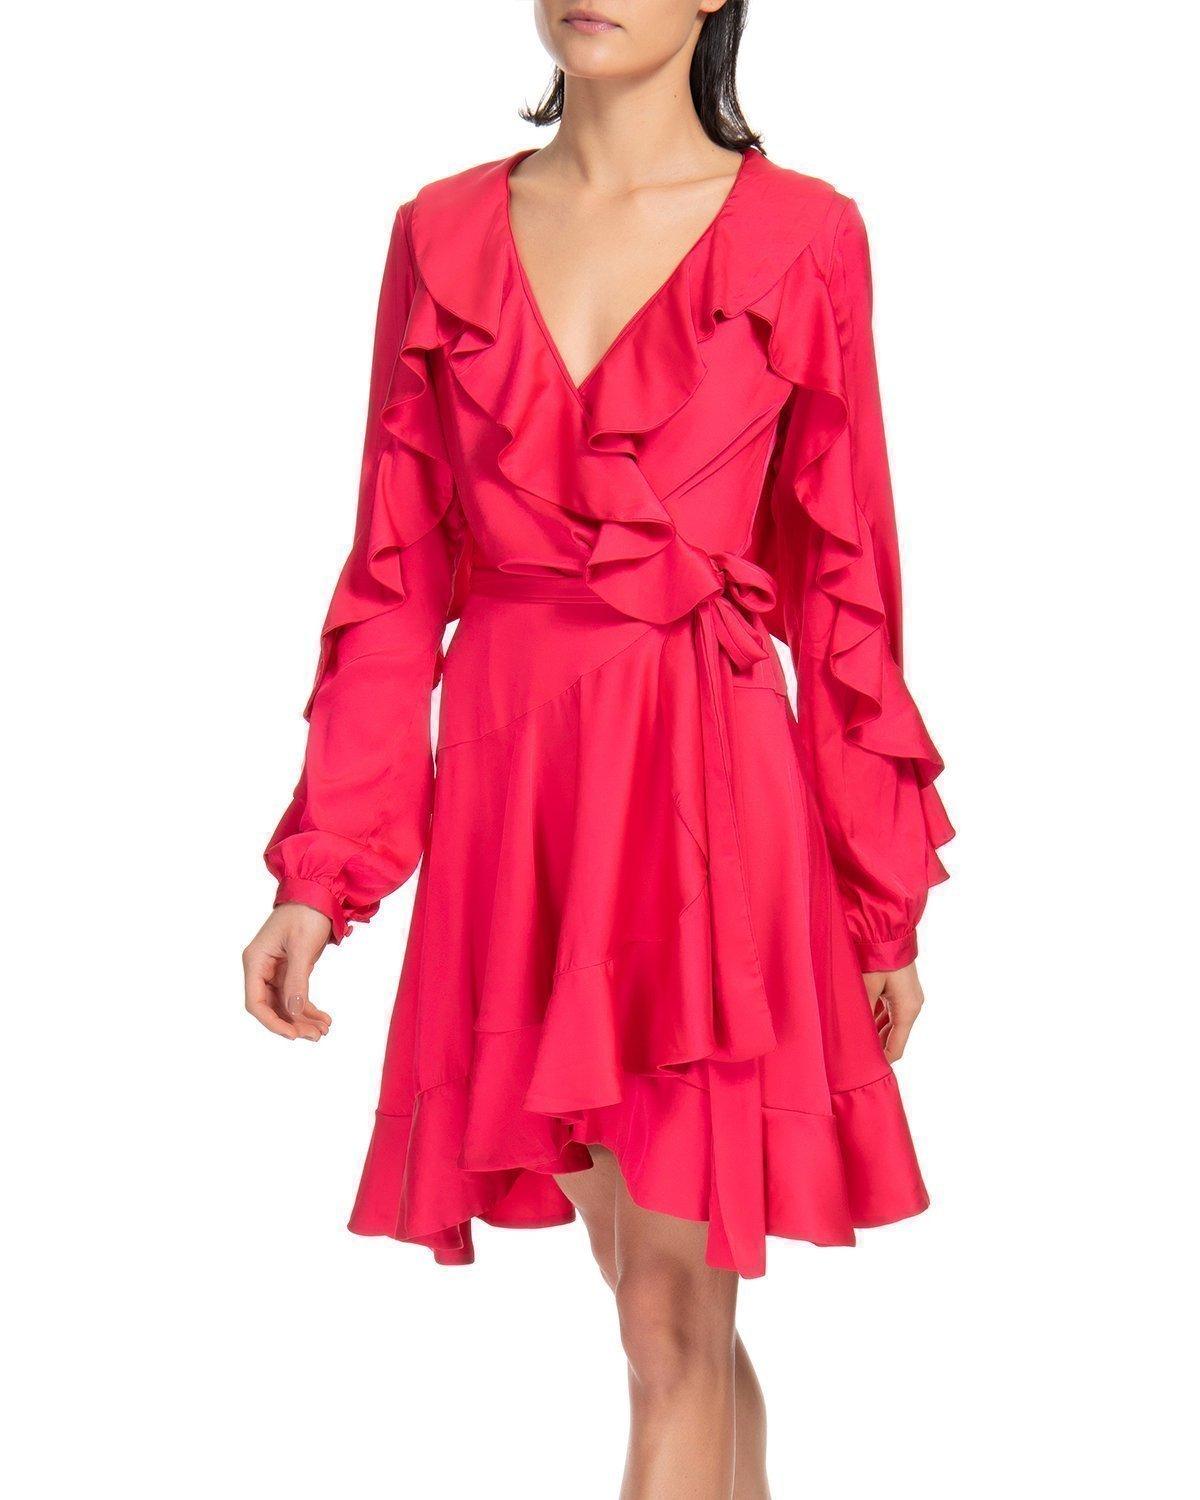 PATBO Synthetic Ruffle Sleeve Mini Wrap Dress in Hot Pink (Pink) - Lyst